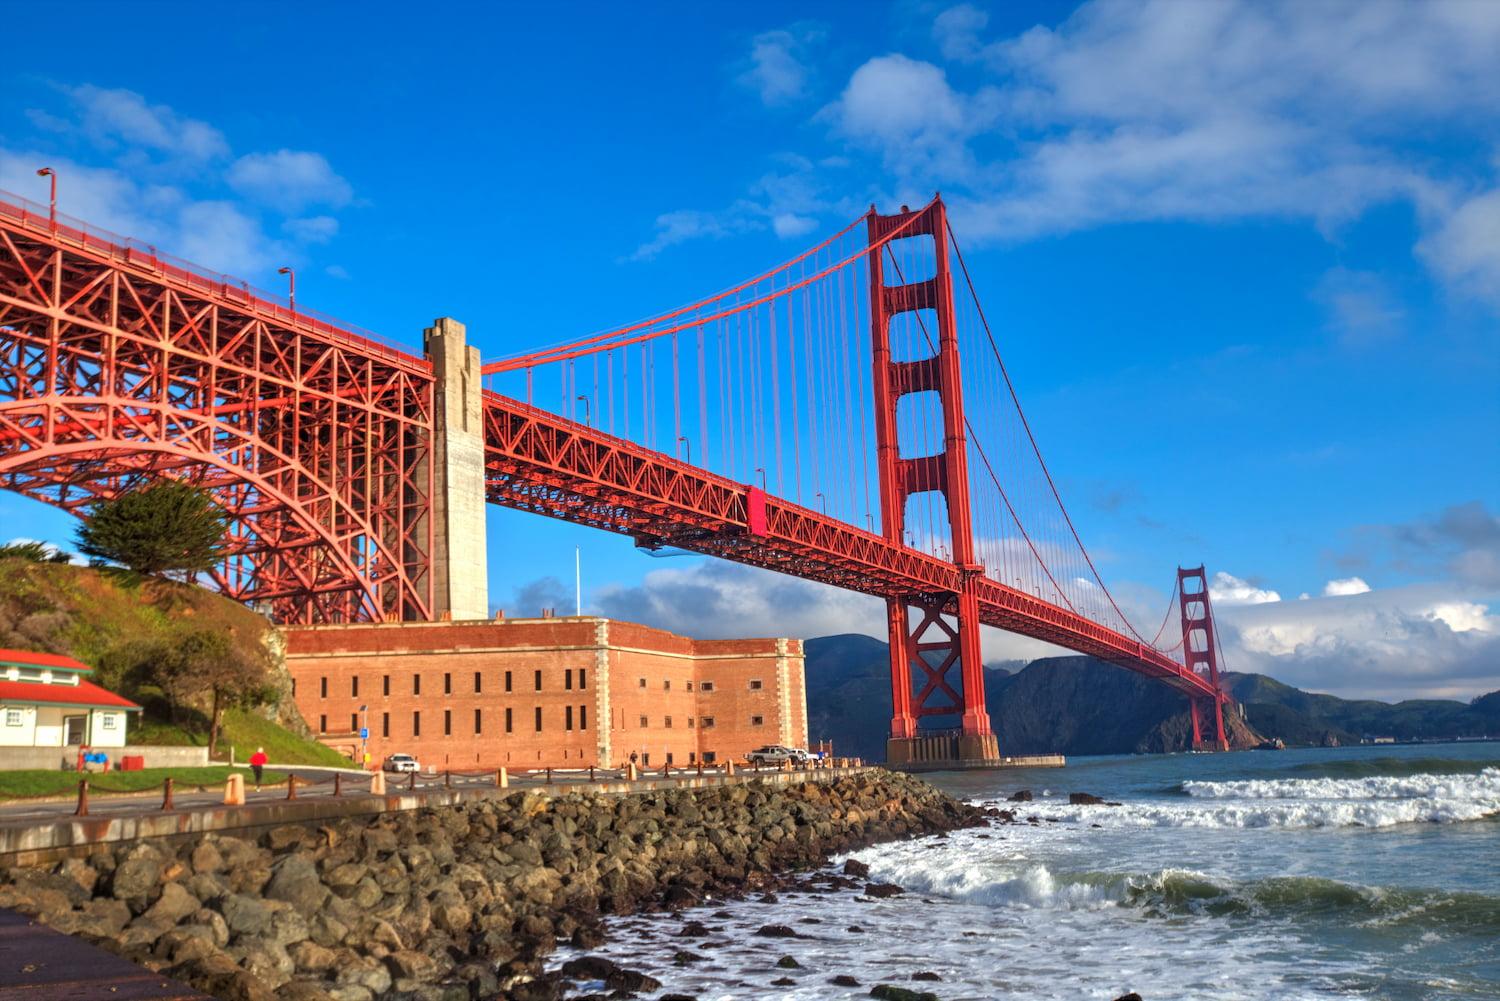 Image of Golden Gate Bridge with Fort Point at the foot.